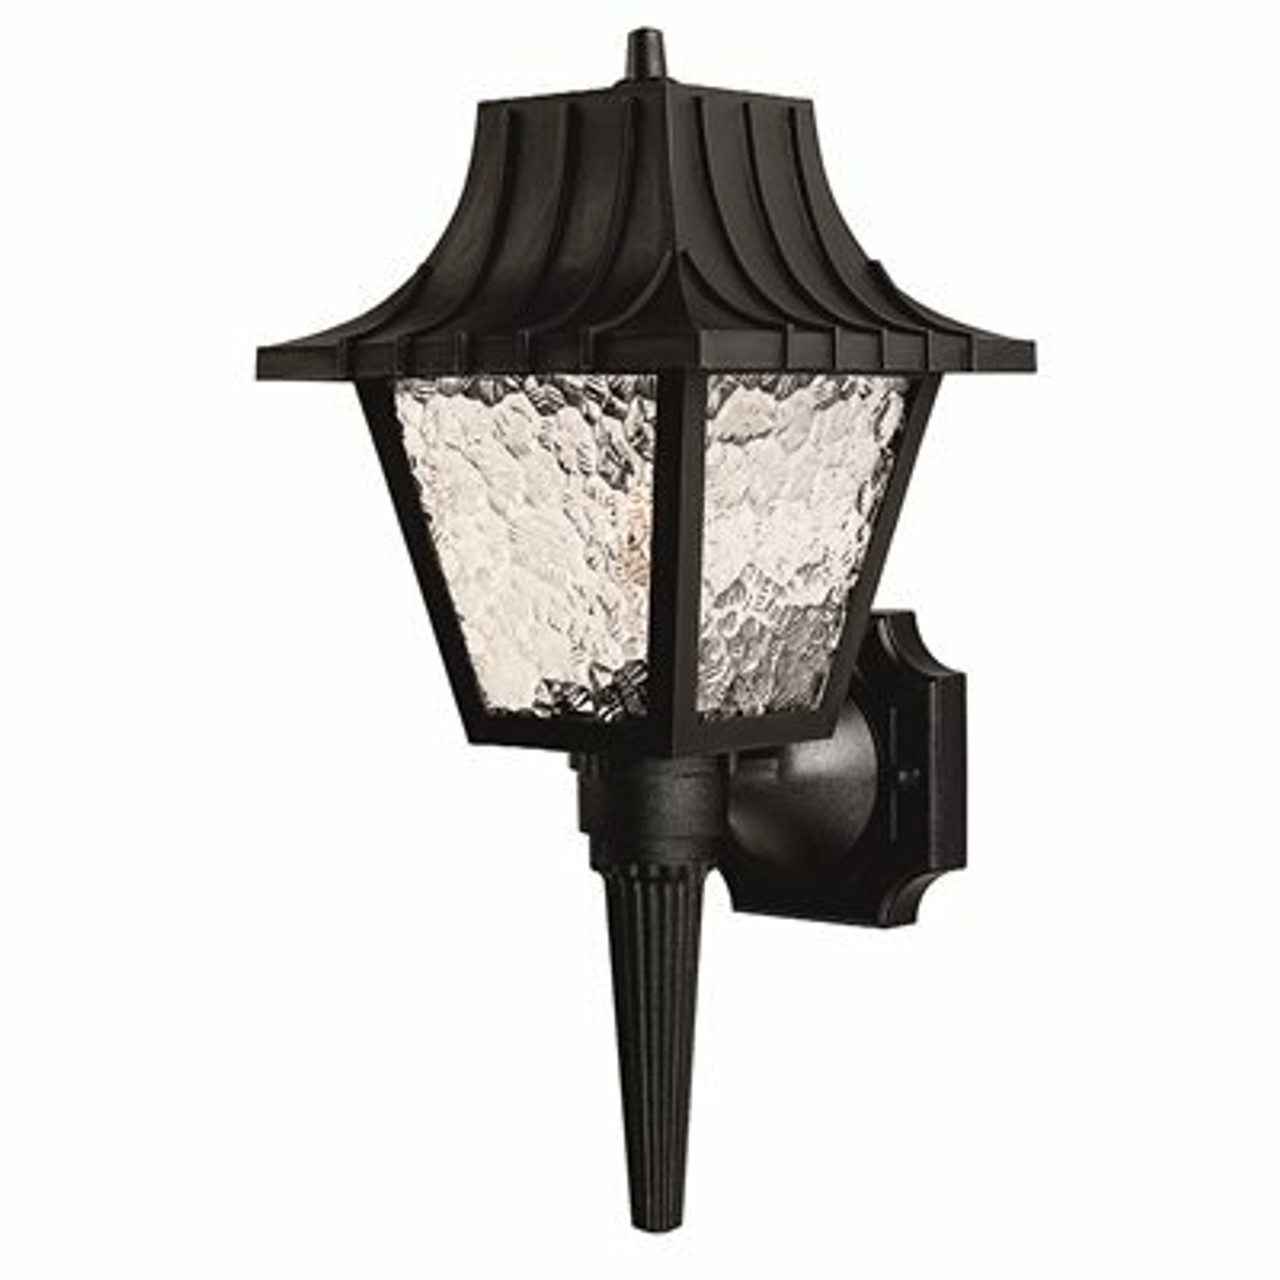 Colonial Style Black Outdoor Wall Lantern With Clear Flemish Lenses, Uses One 60-Watt Incandescent Lamp